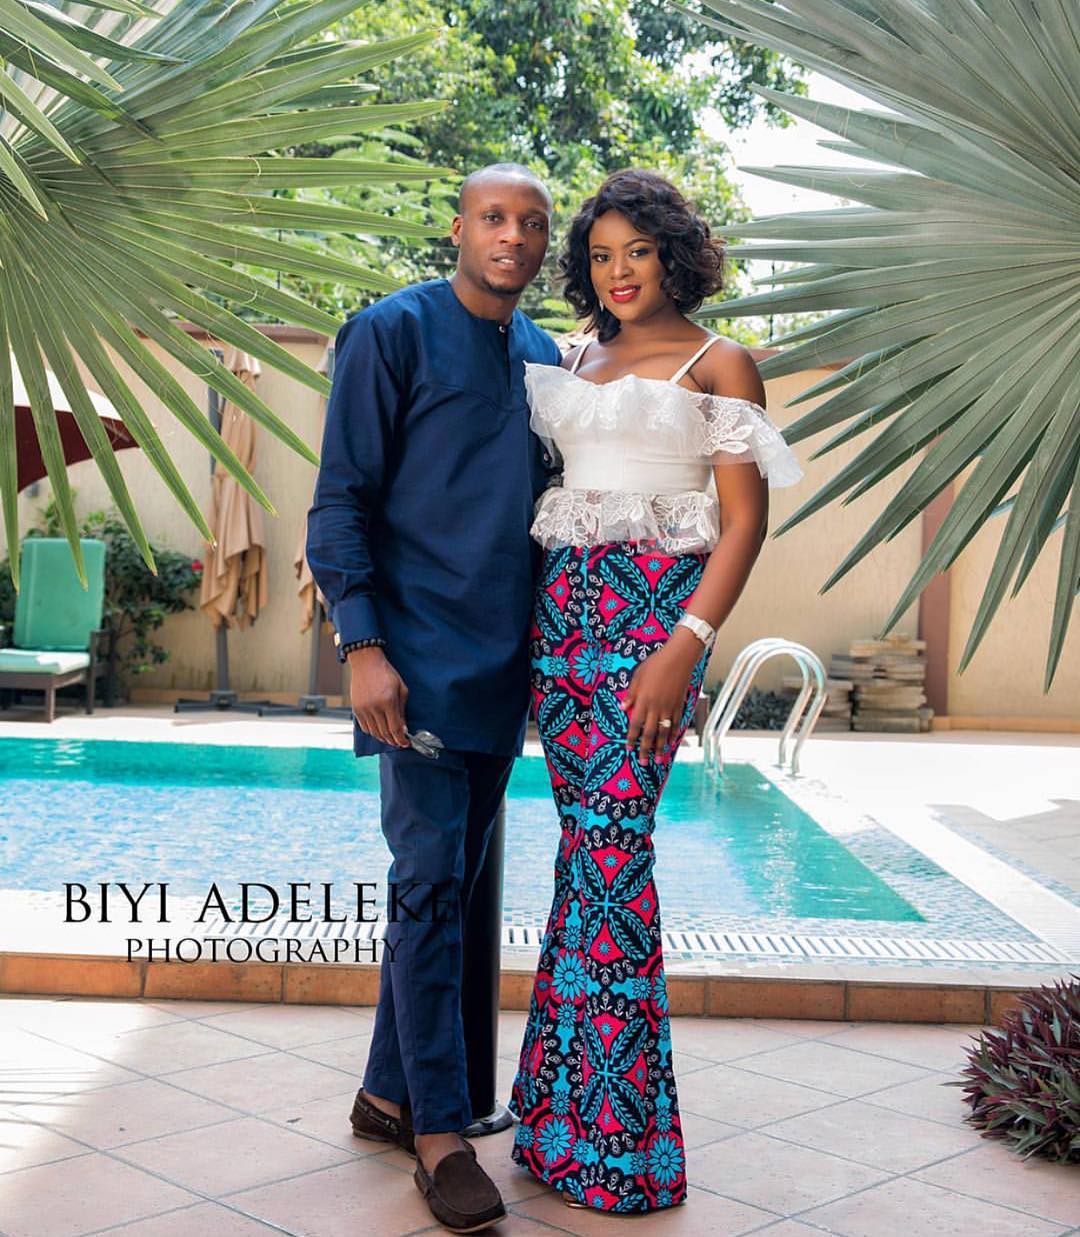 These Sexy Unique Ankara Styles Will Wow You!